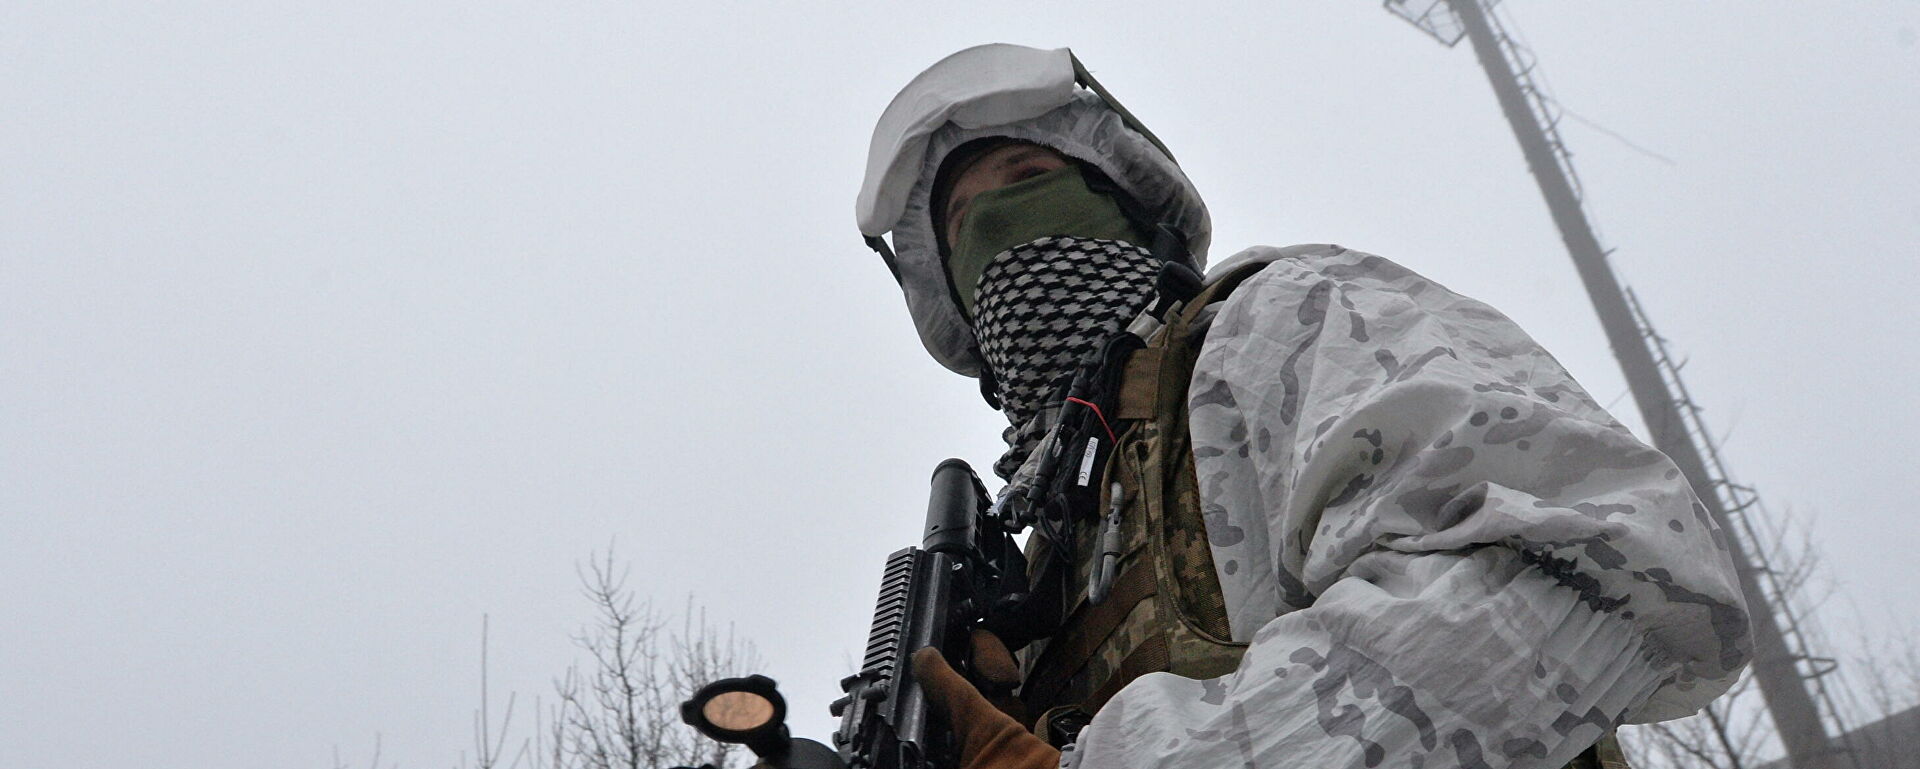 Soldier of the Ukrainian Armed Forces near the line of contact in the Donetsk region of Ukraine 11 February 2022 - Sputnik Brazil, 1920, 19.02.2022